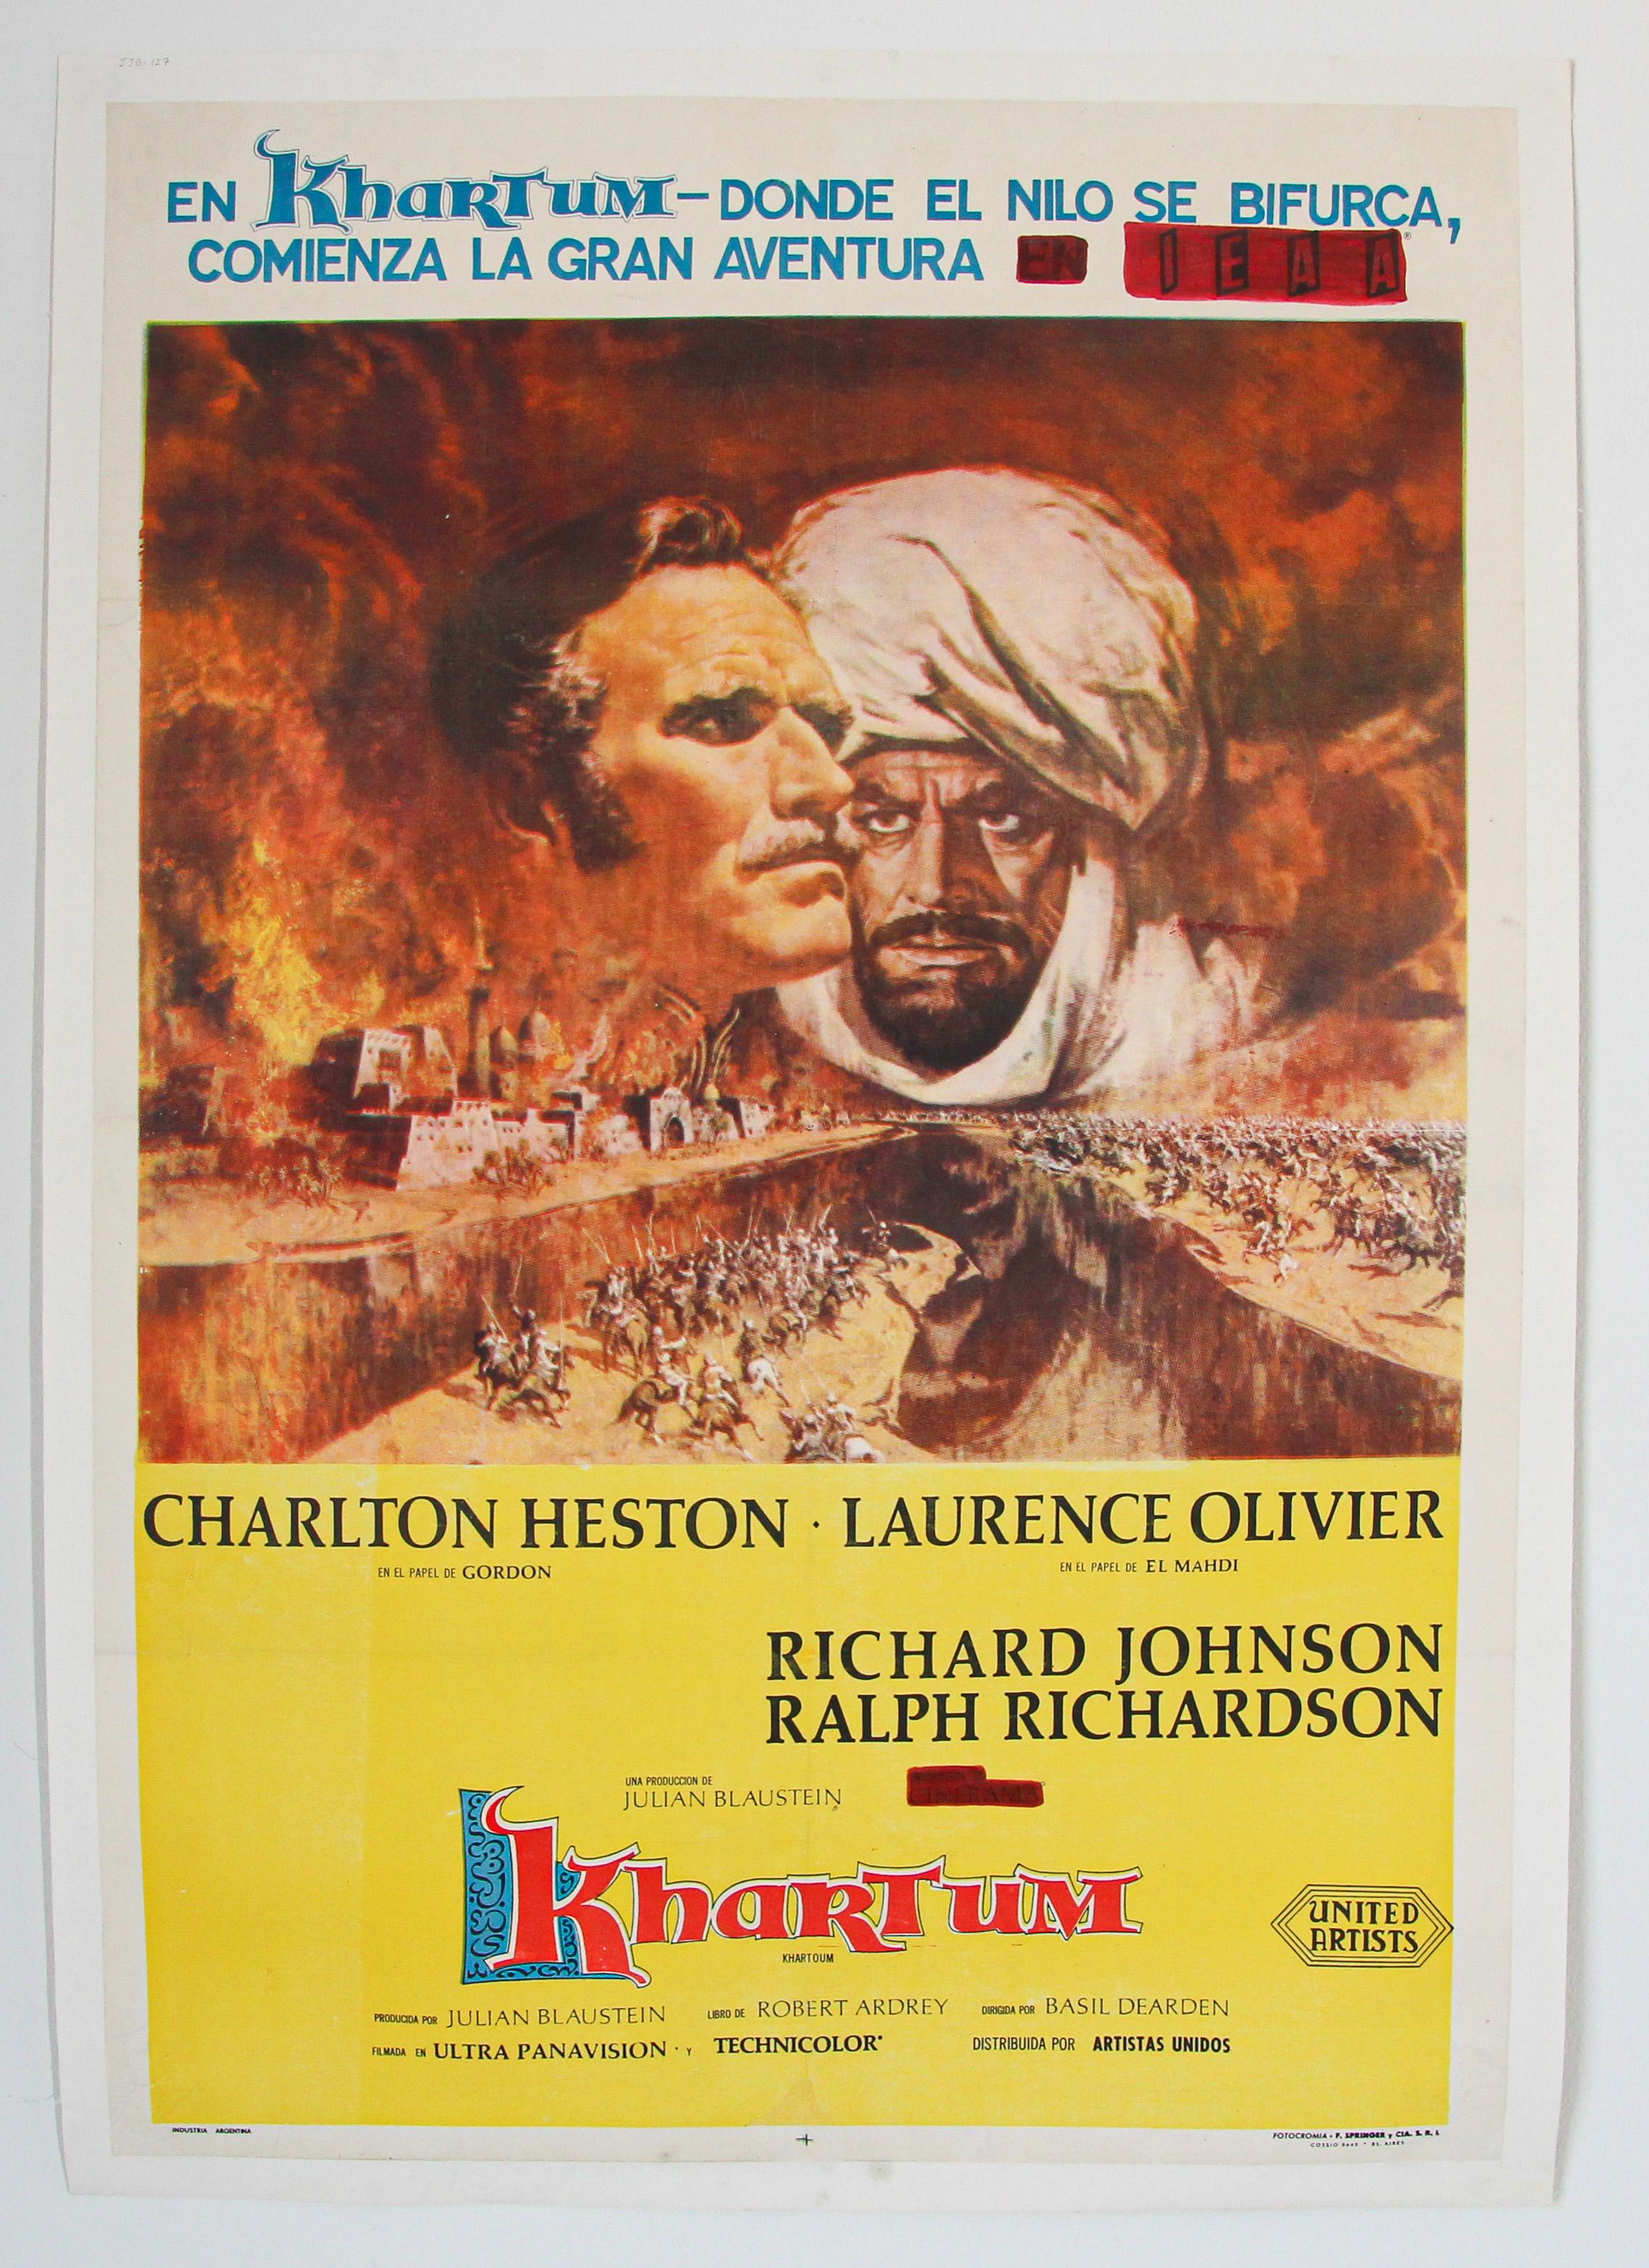 Hand-Crafted Khartoum, 1966 British Epic War Movie Poster in Spanish For Sale